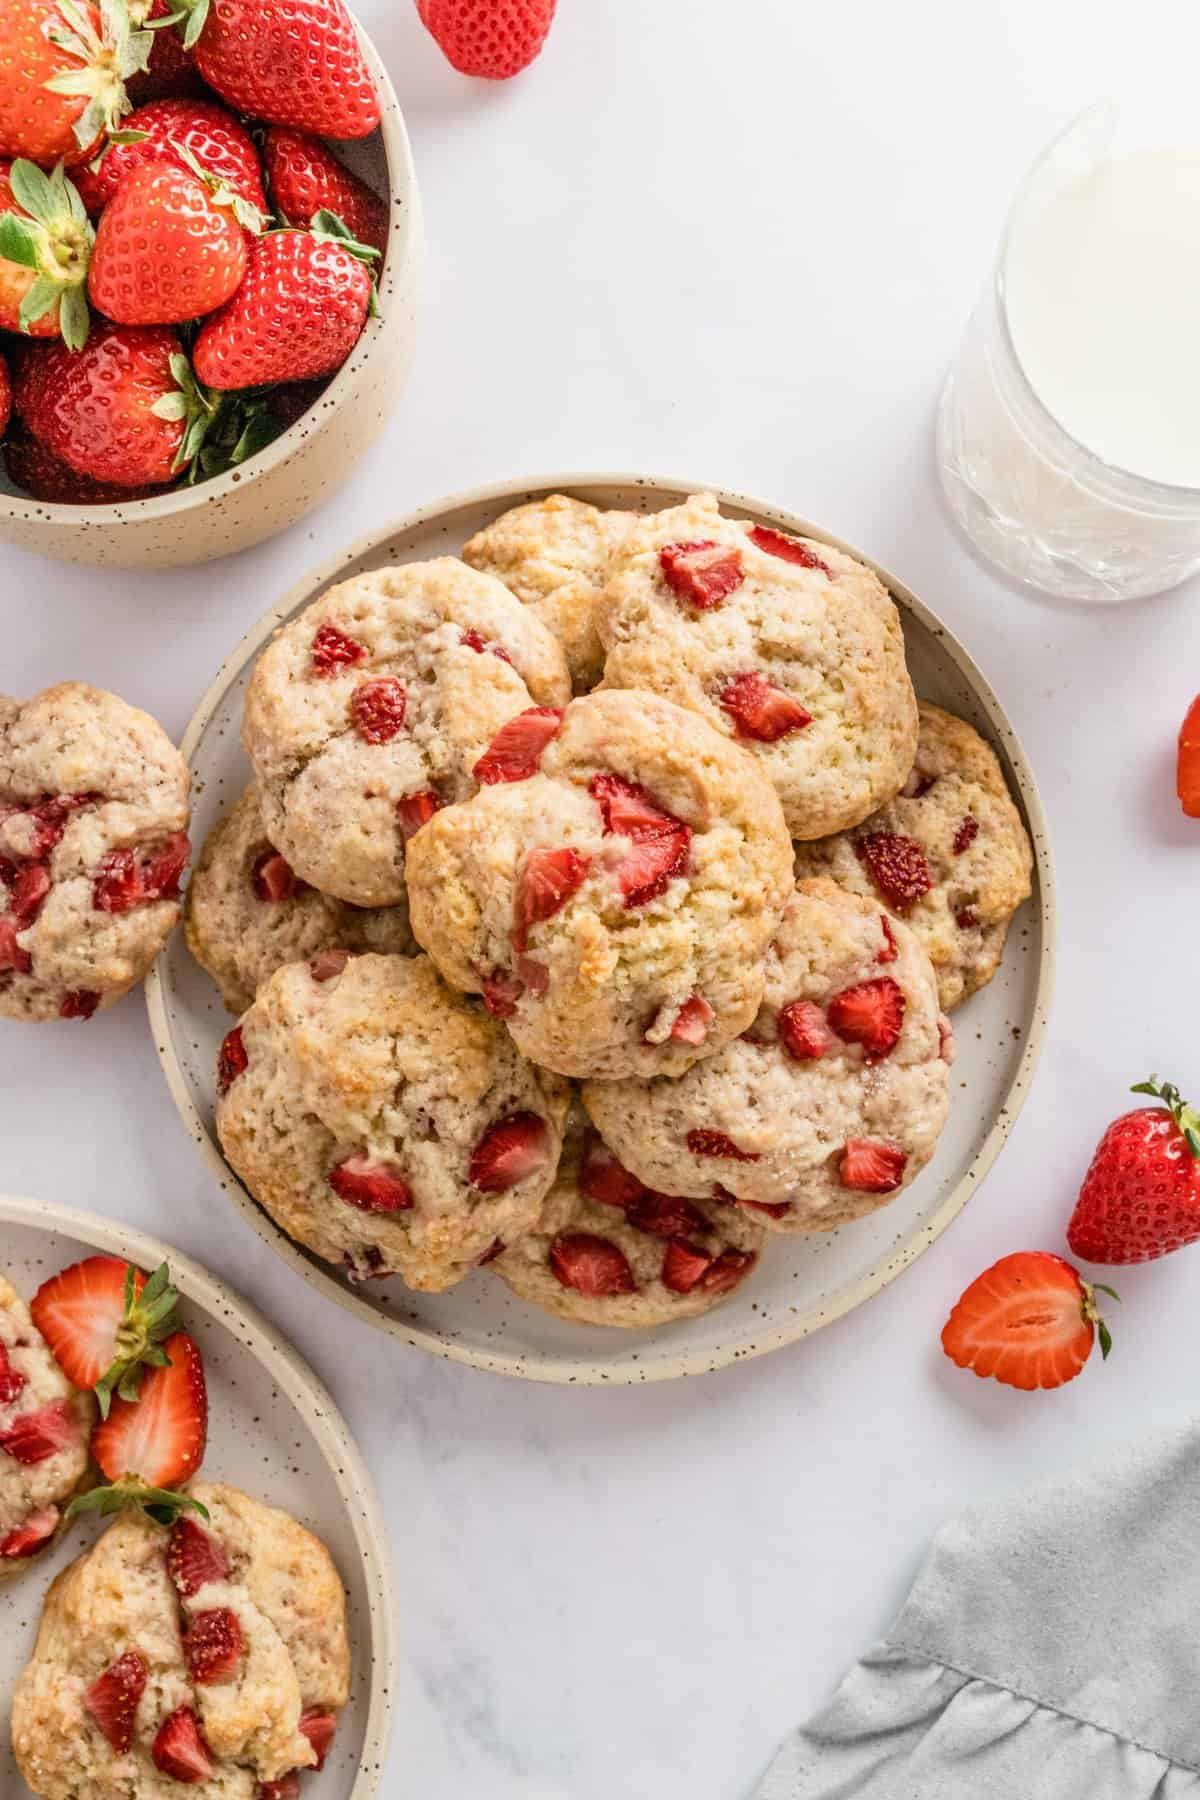 Cookies in center with milk and bowl of strawberries in corners. 